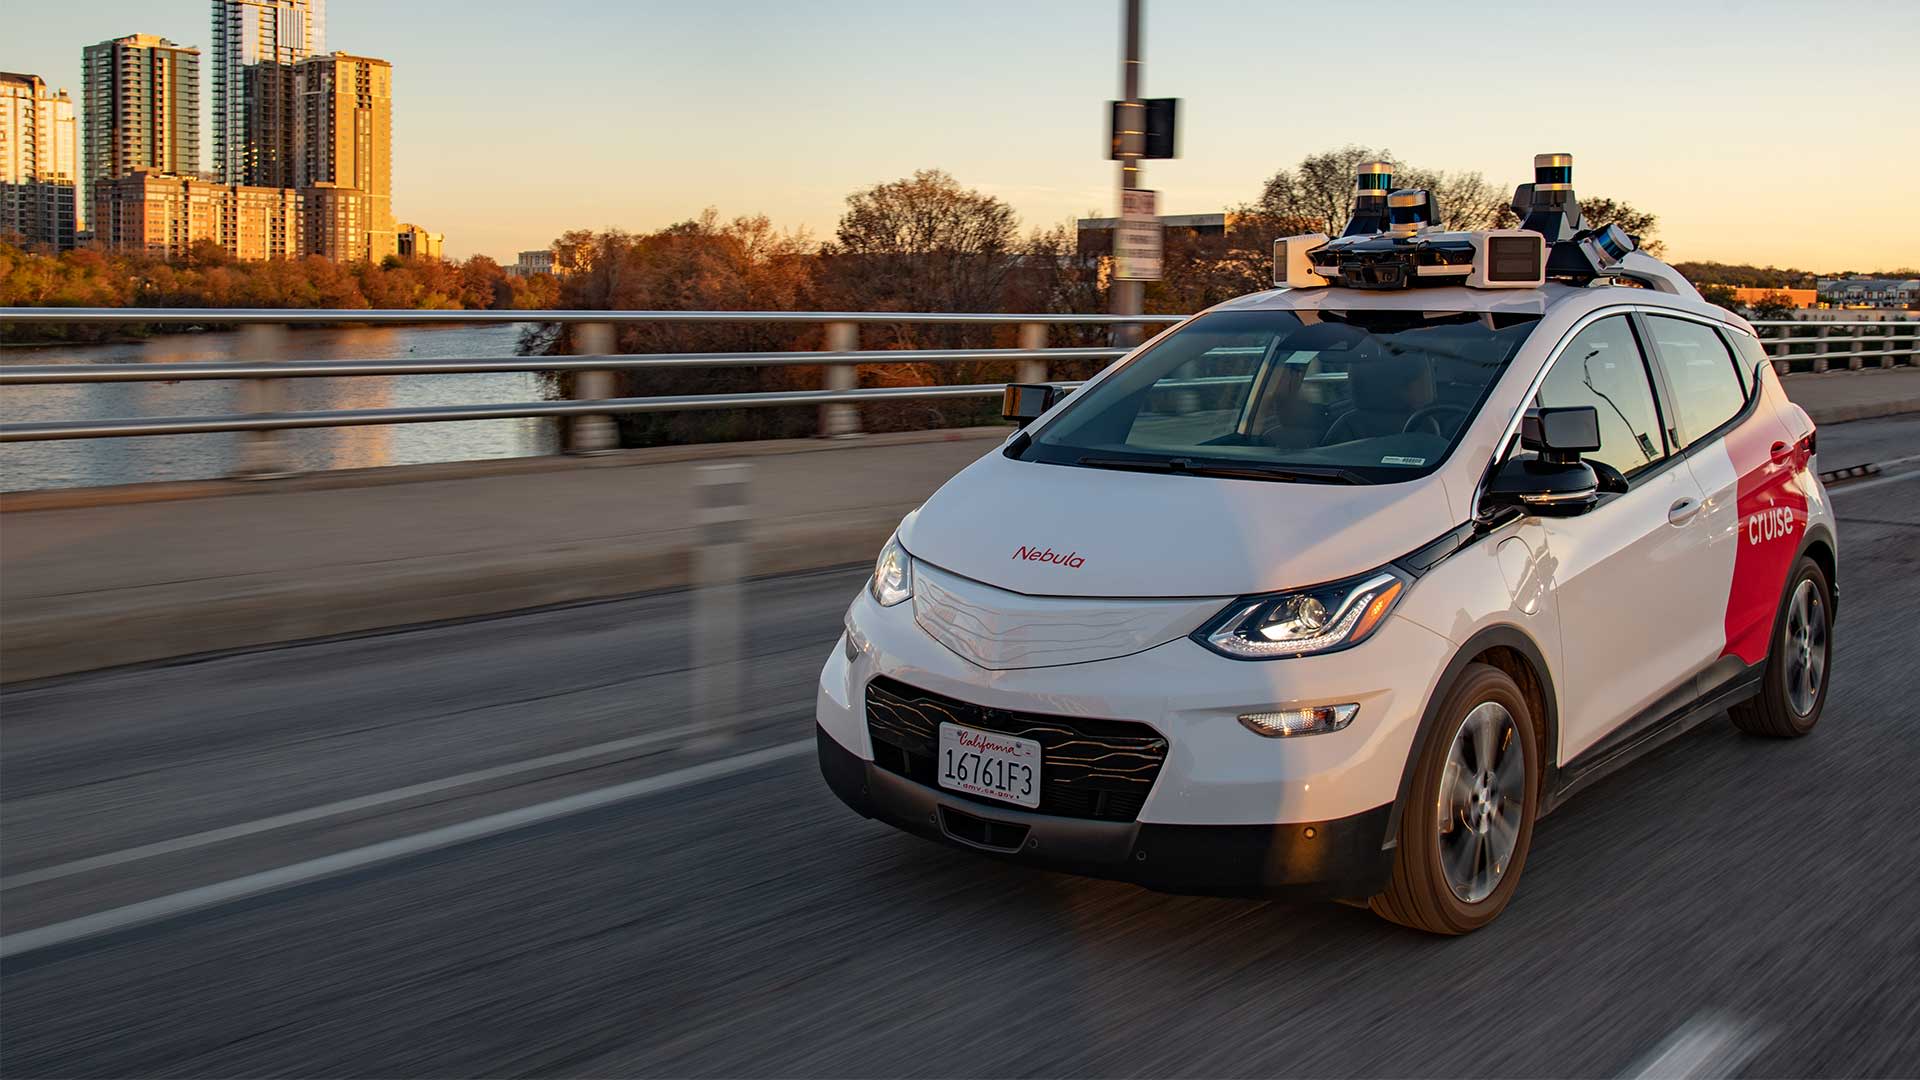 Fear of Self-Driving Cars Persists, according to AAA research